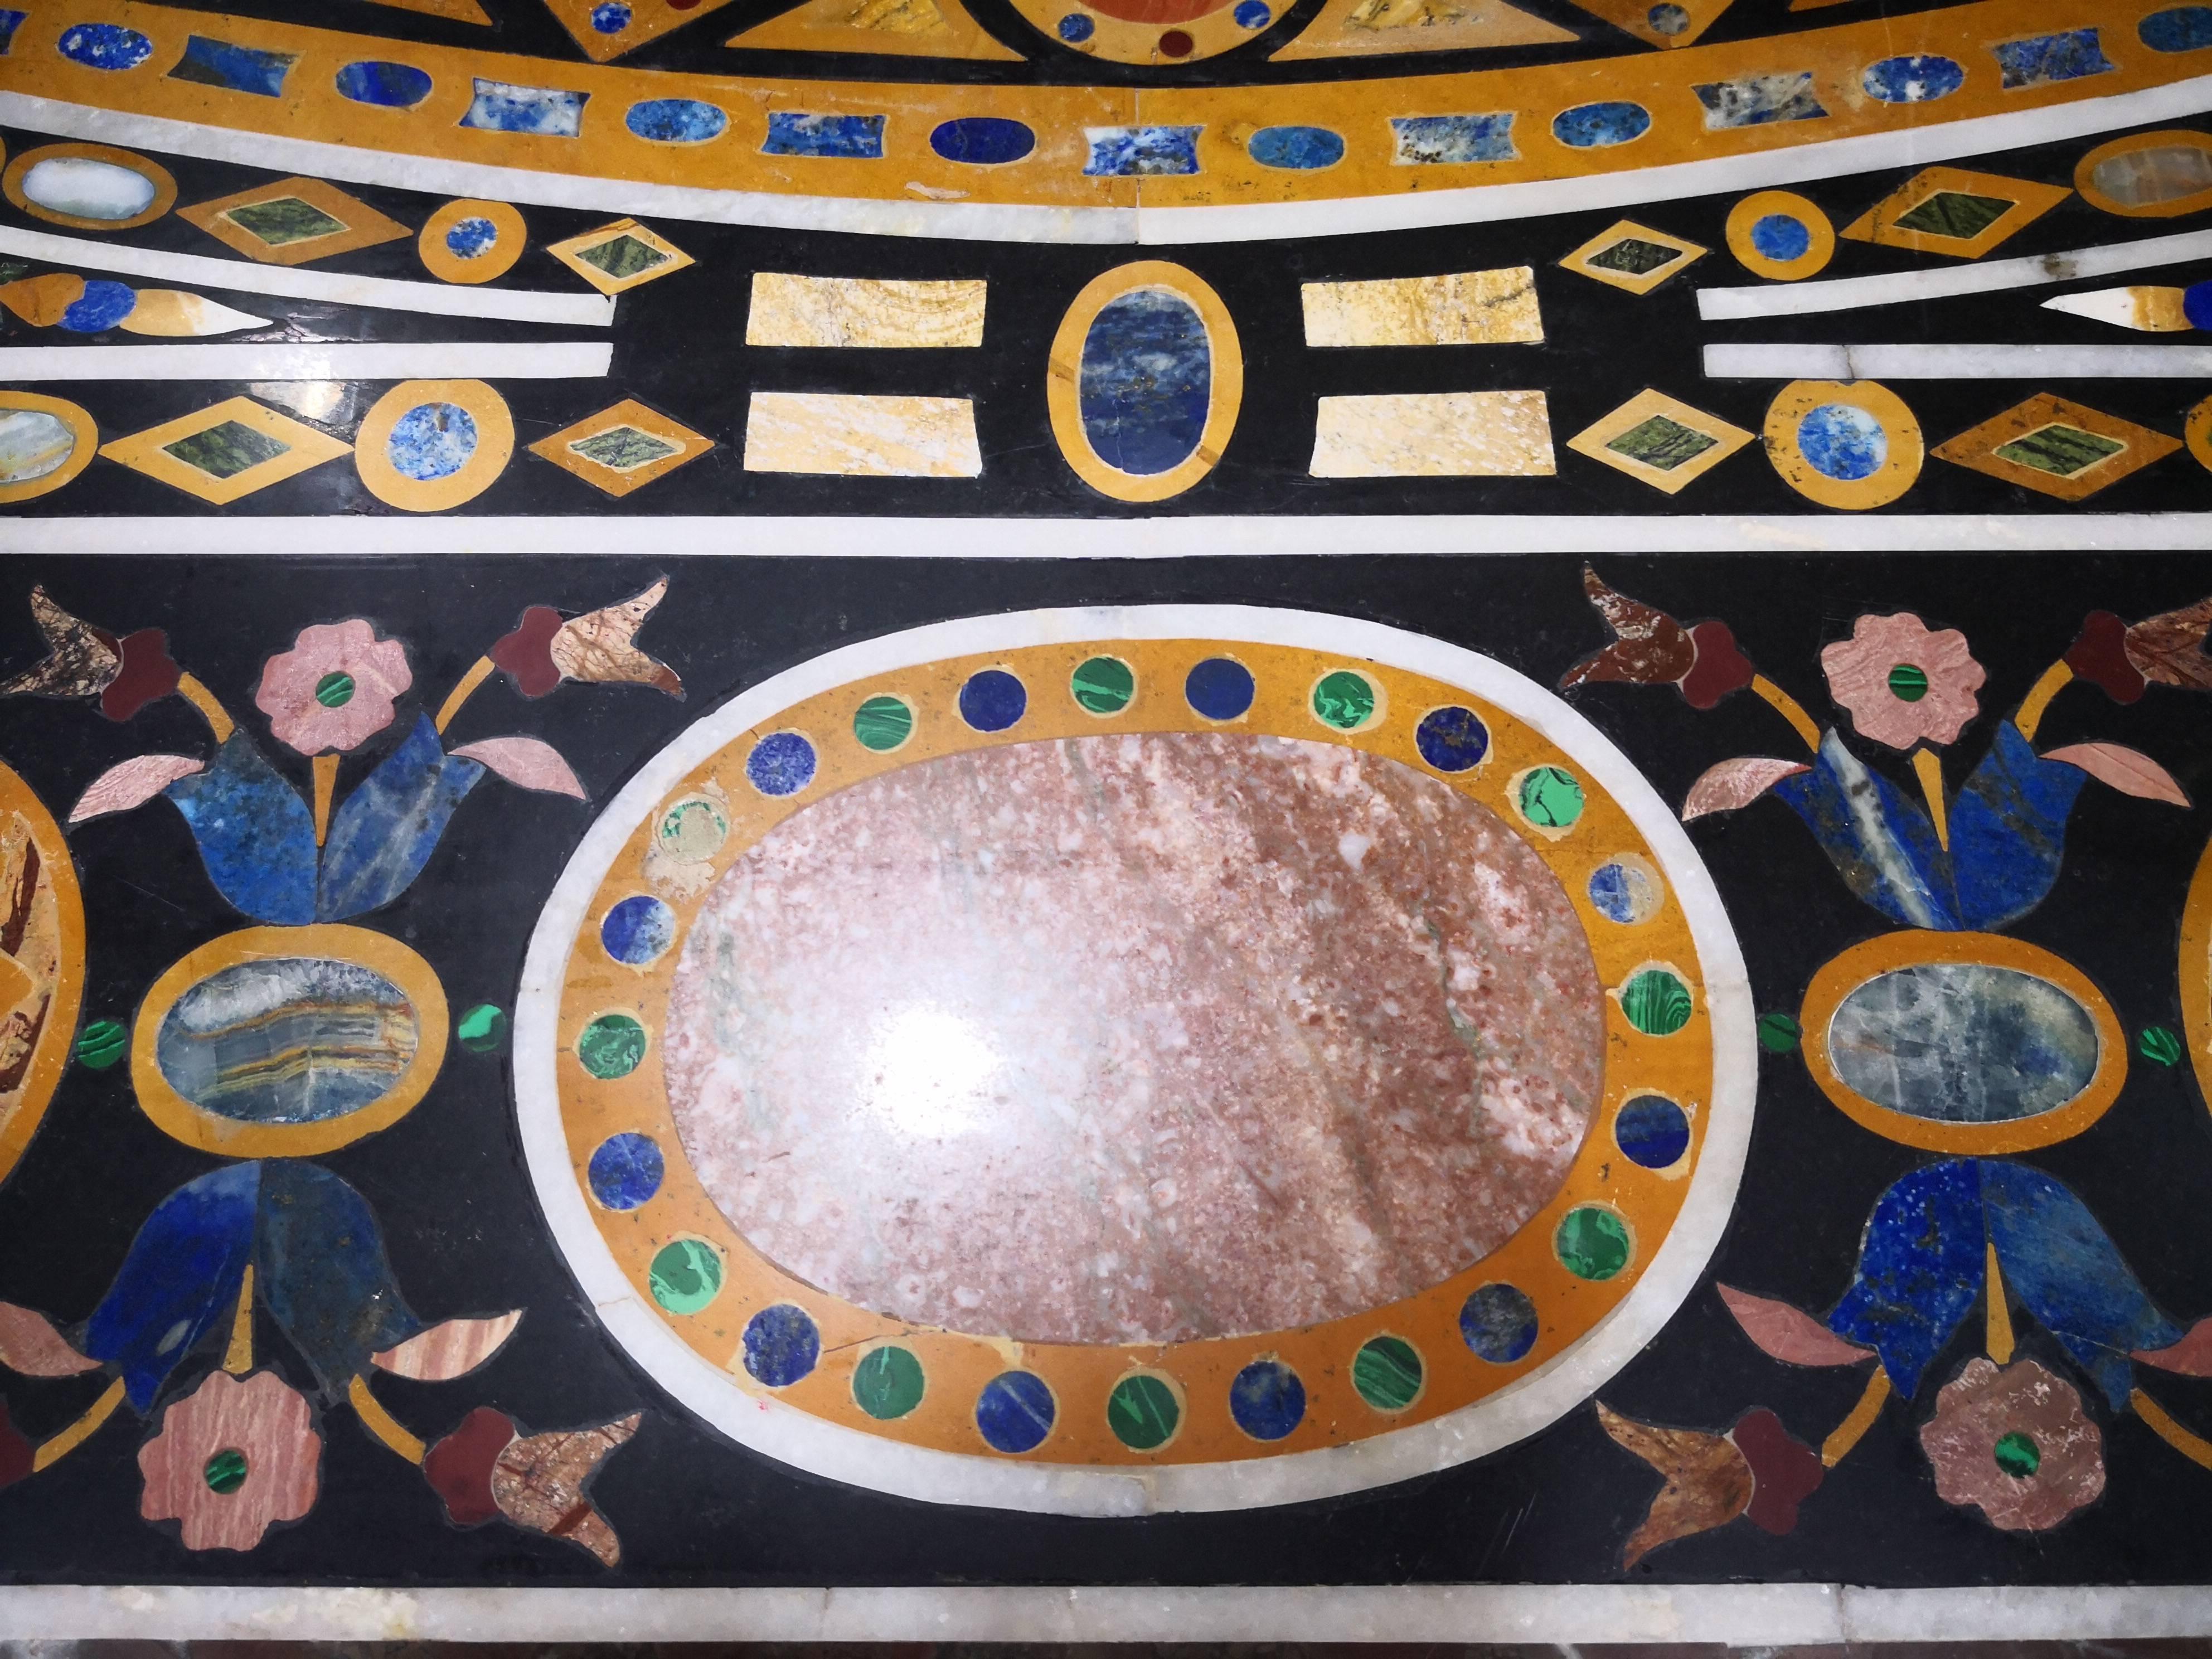 Handmade ten-seat dining table in Italian pietra dura inlay mosaic, composed of semi precious stones such as blue lapis, turquoise and green malachite.

It is reproduction of a 16th century Italian tabletop bought by Philip II in 1587 for the